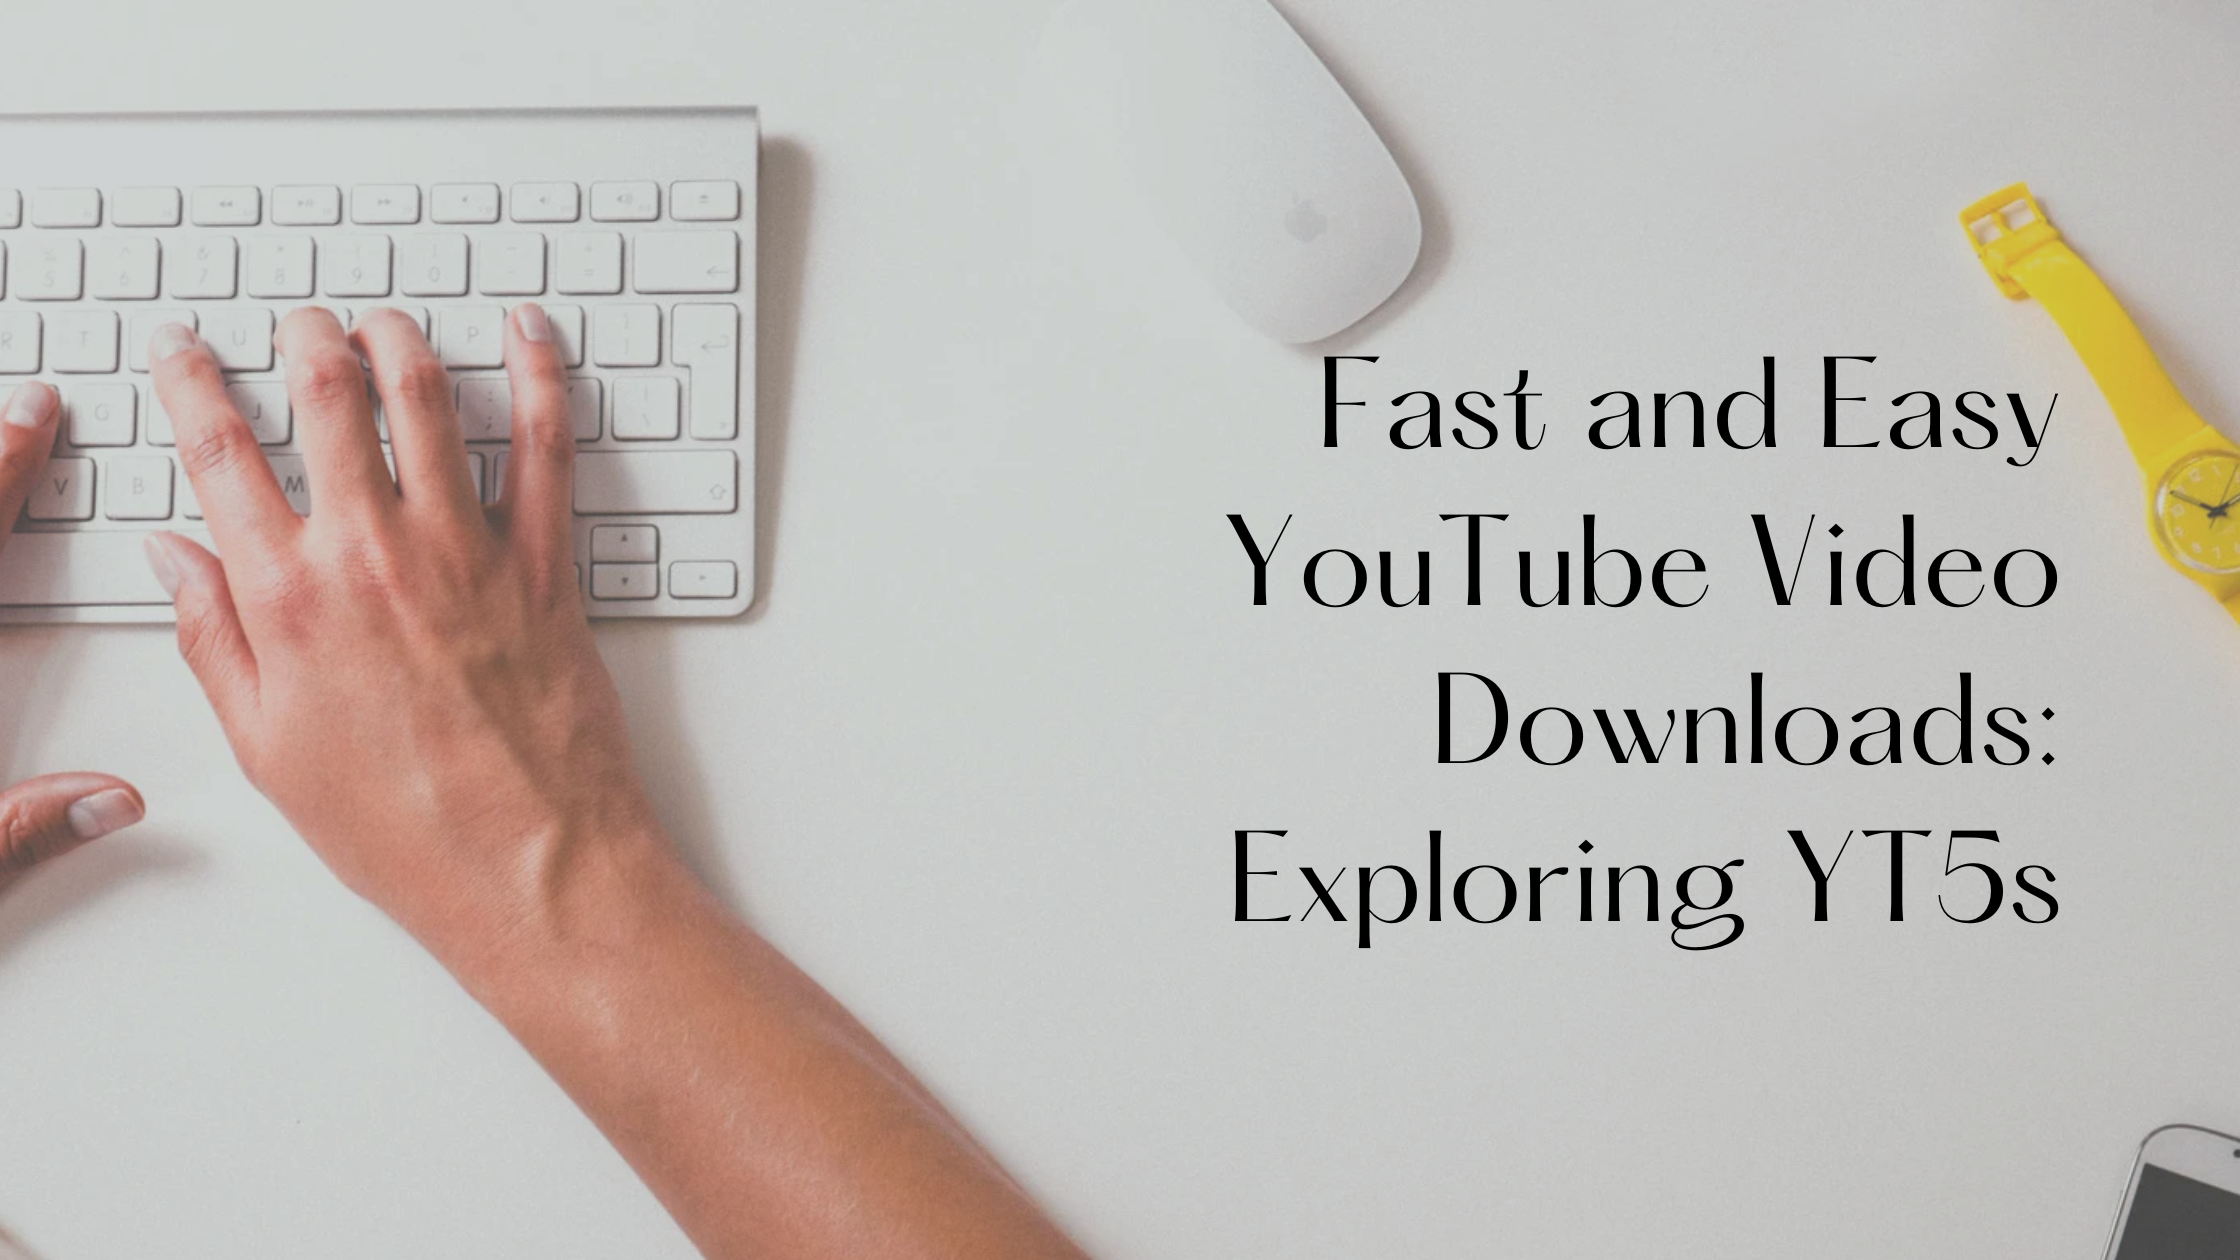 Fast and Easy YouTube Video Downloads: Exploring YT5s